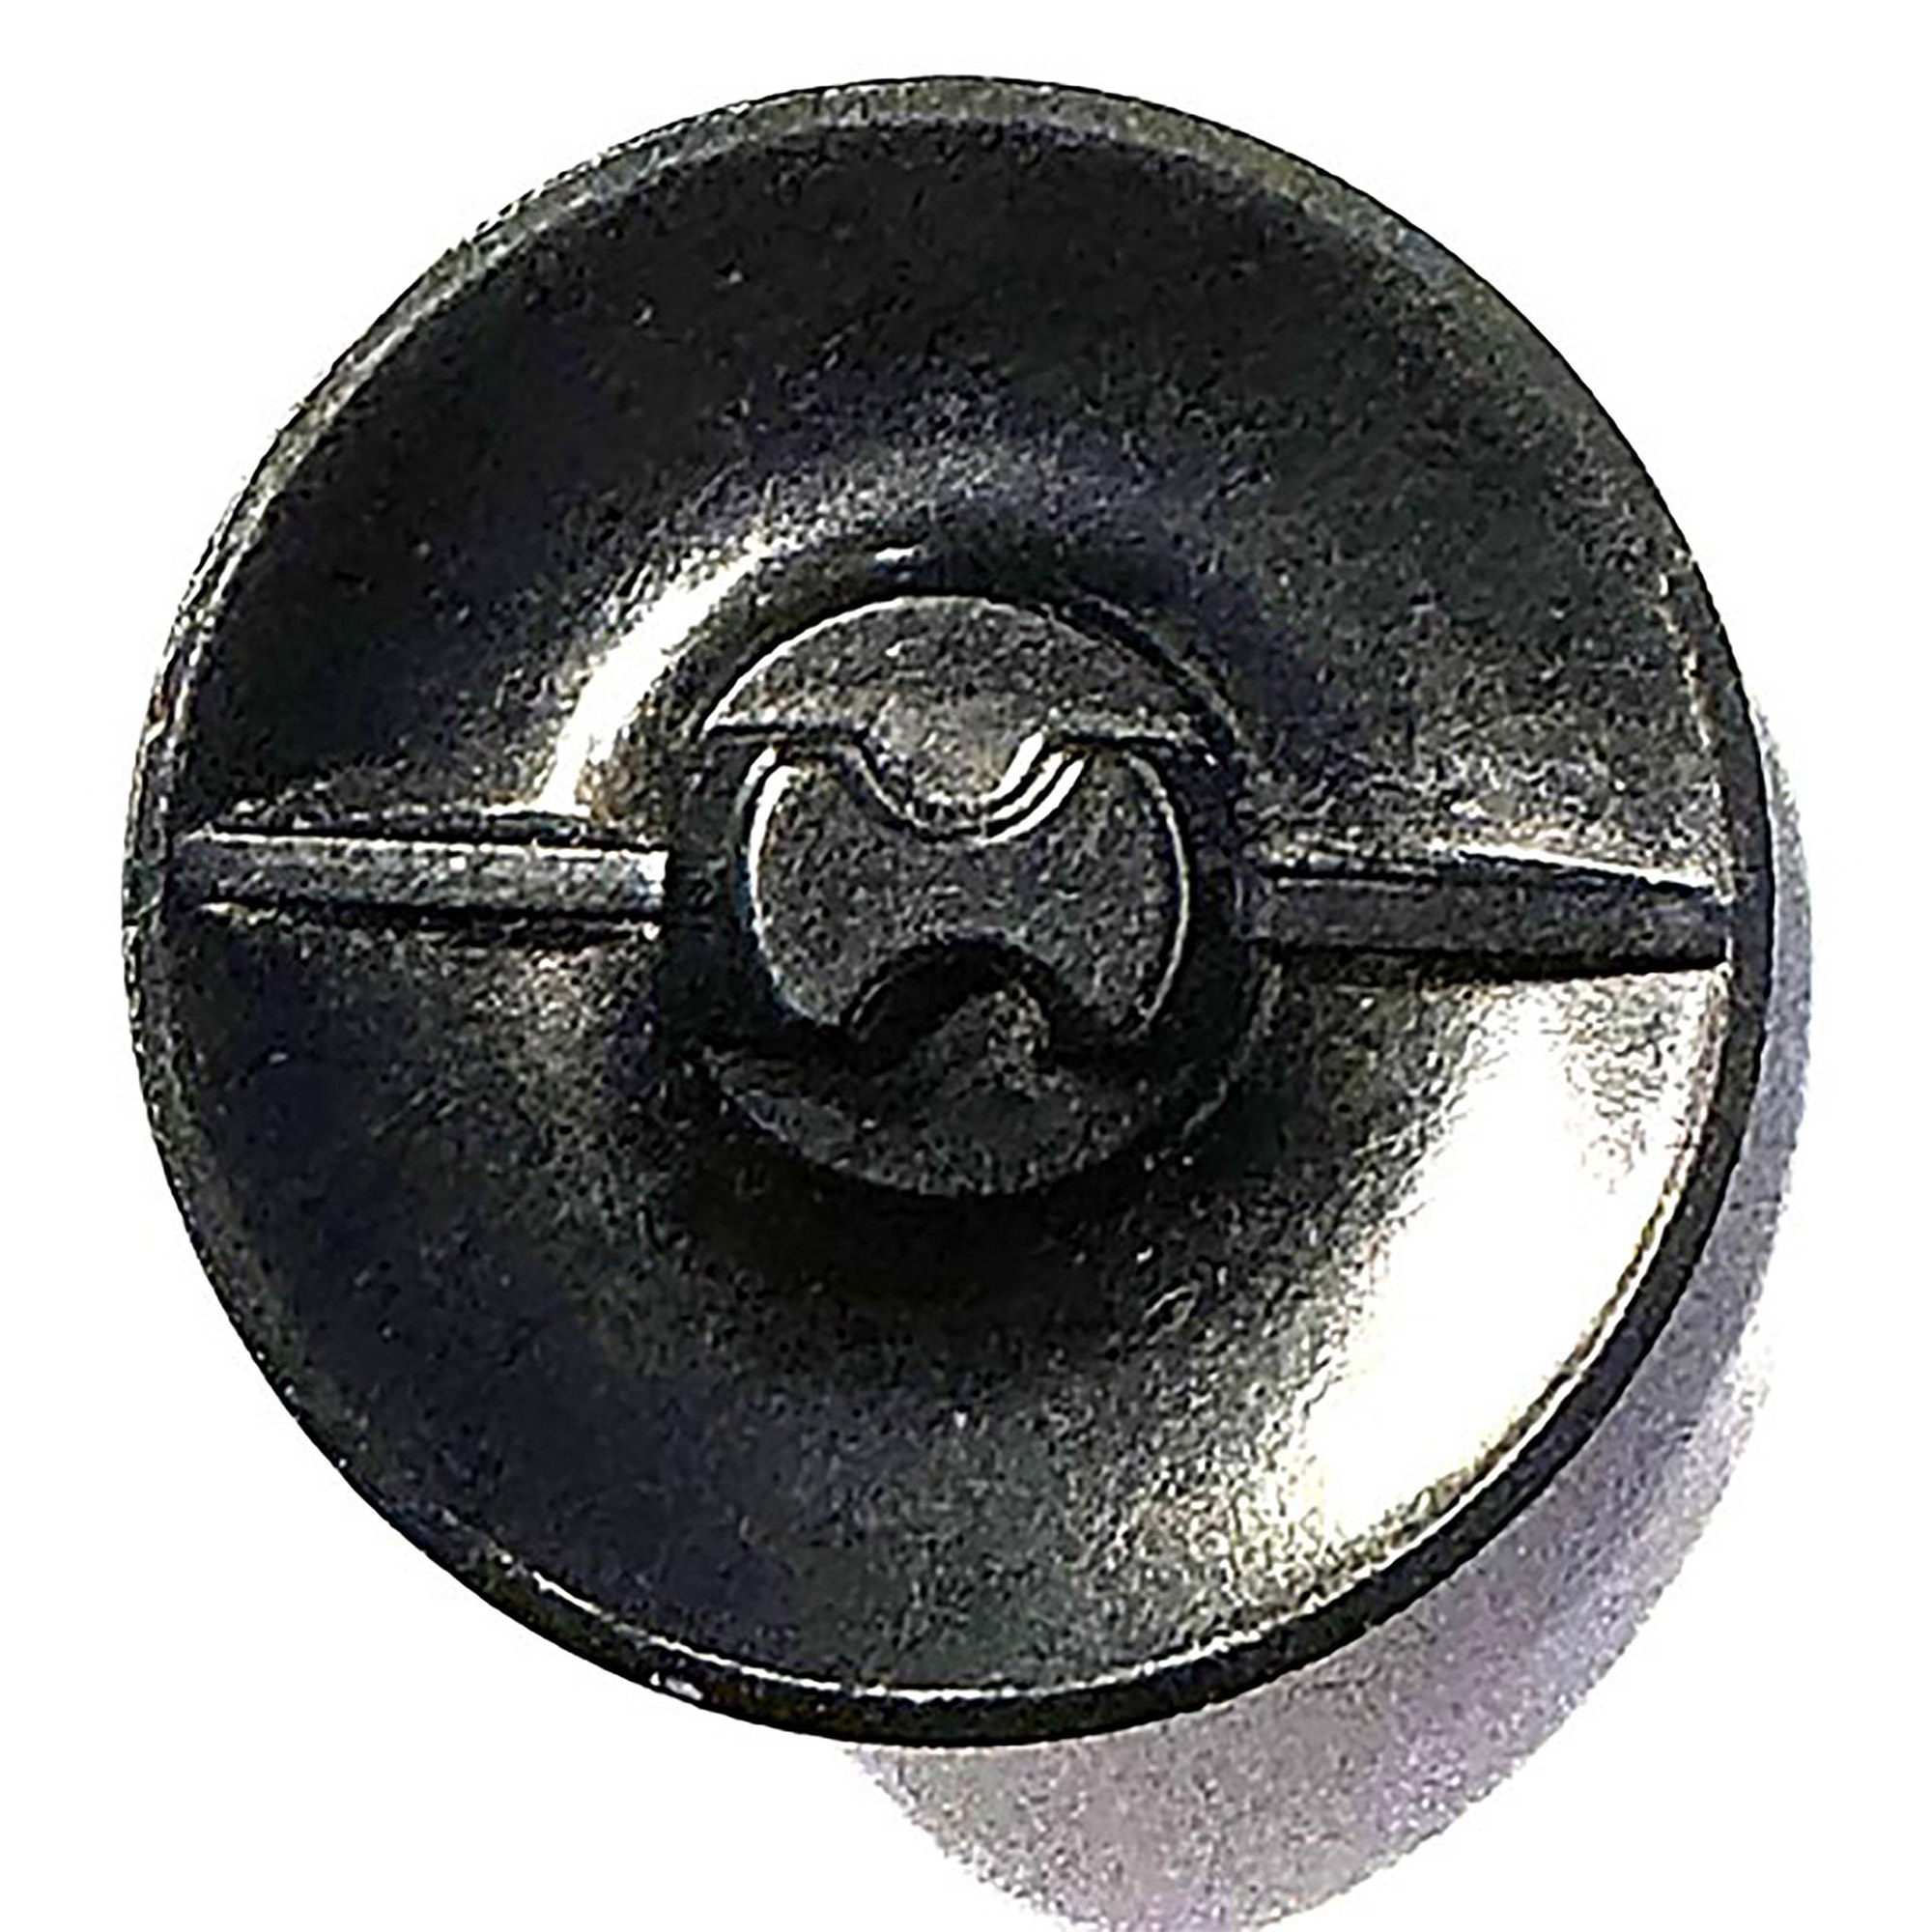 A division three COLT firearms plastic button - Image 3 of 3